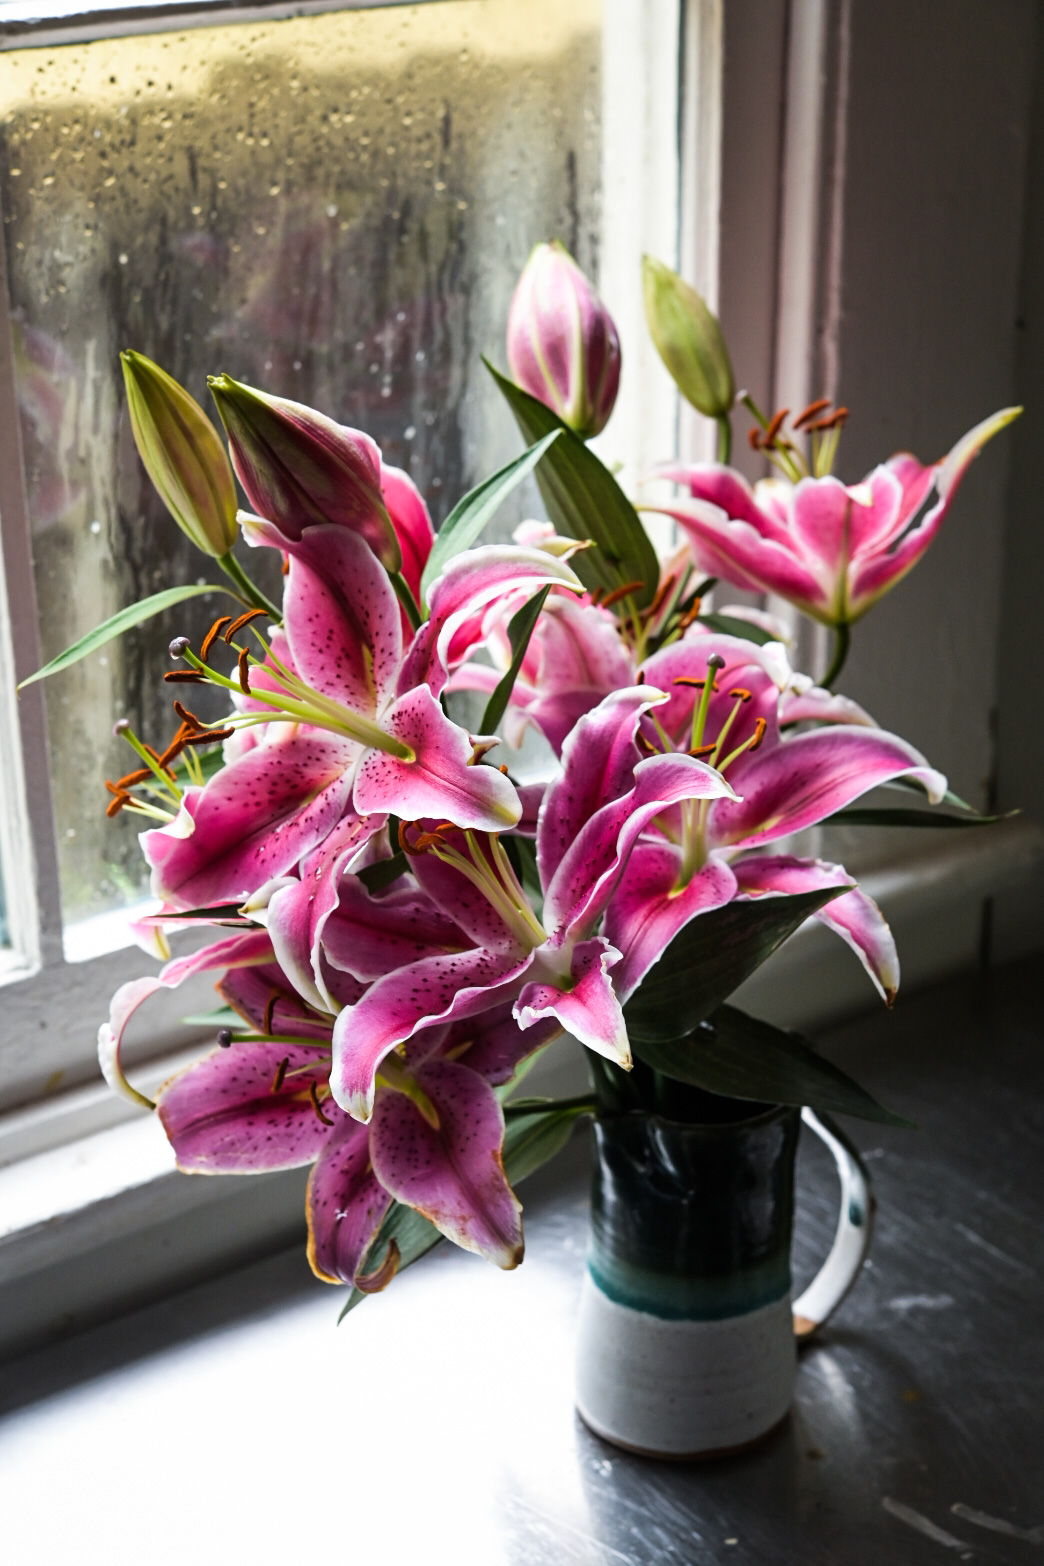 Pink lilies in the window light at the home kitchen studio